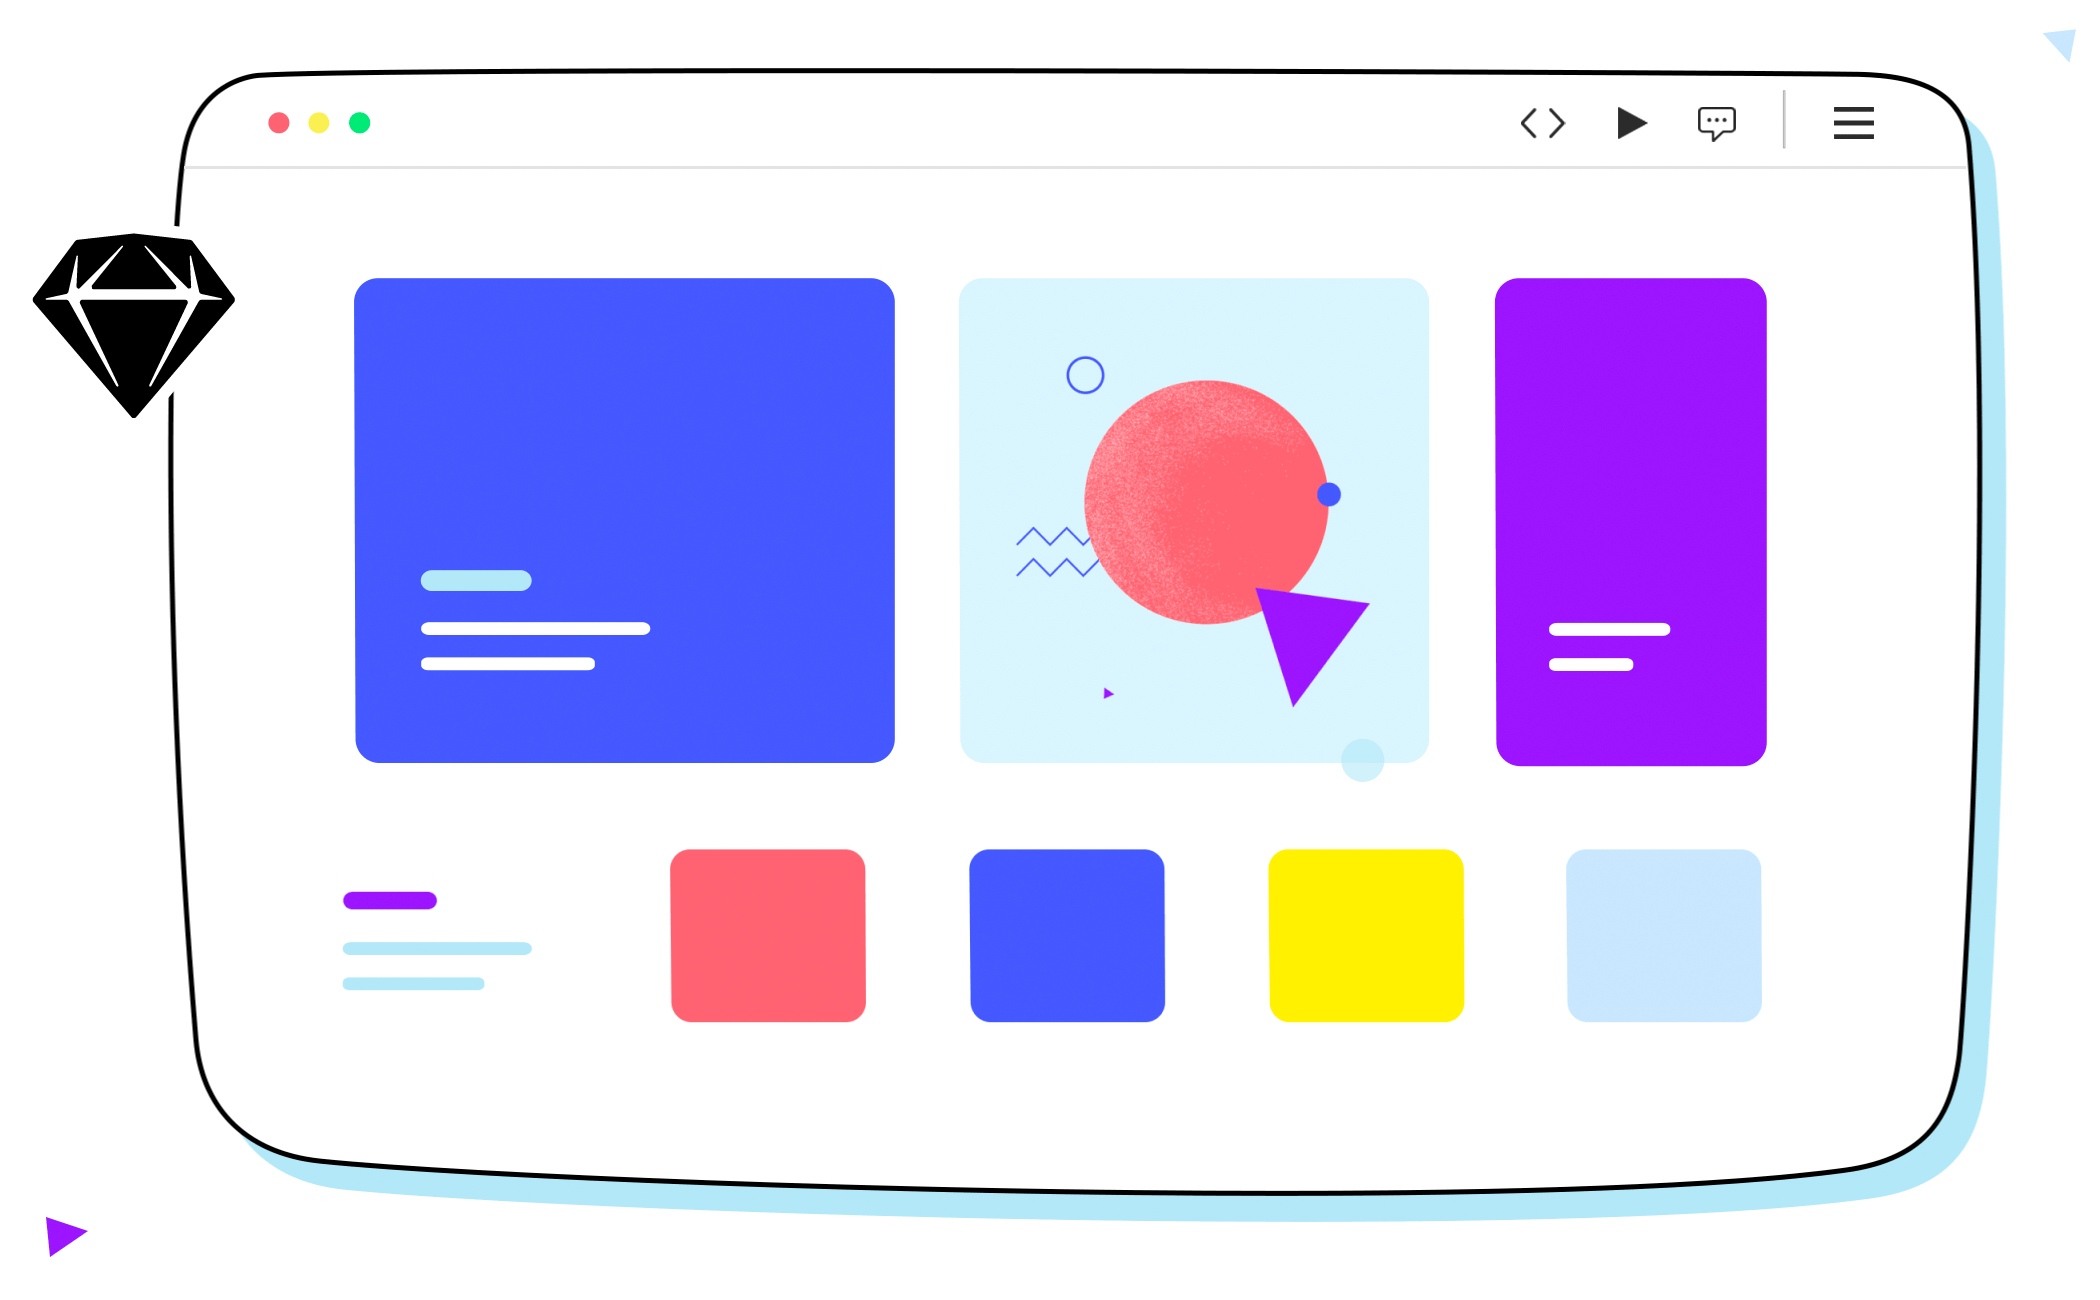 Design interactive projects with sketch and justinmind